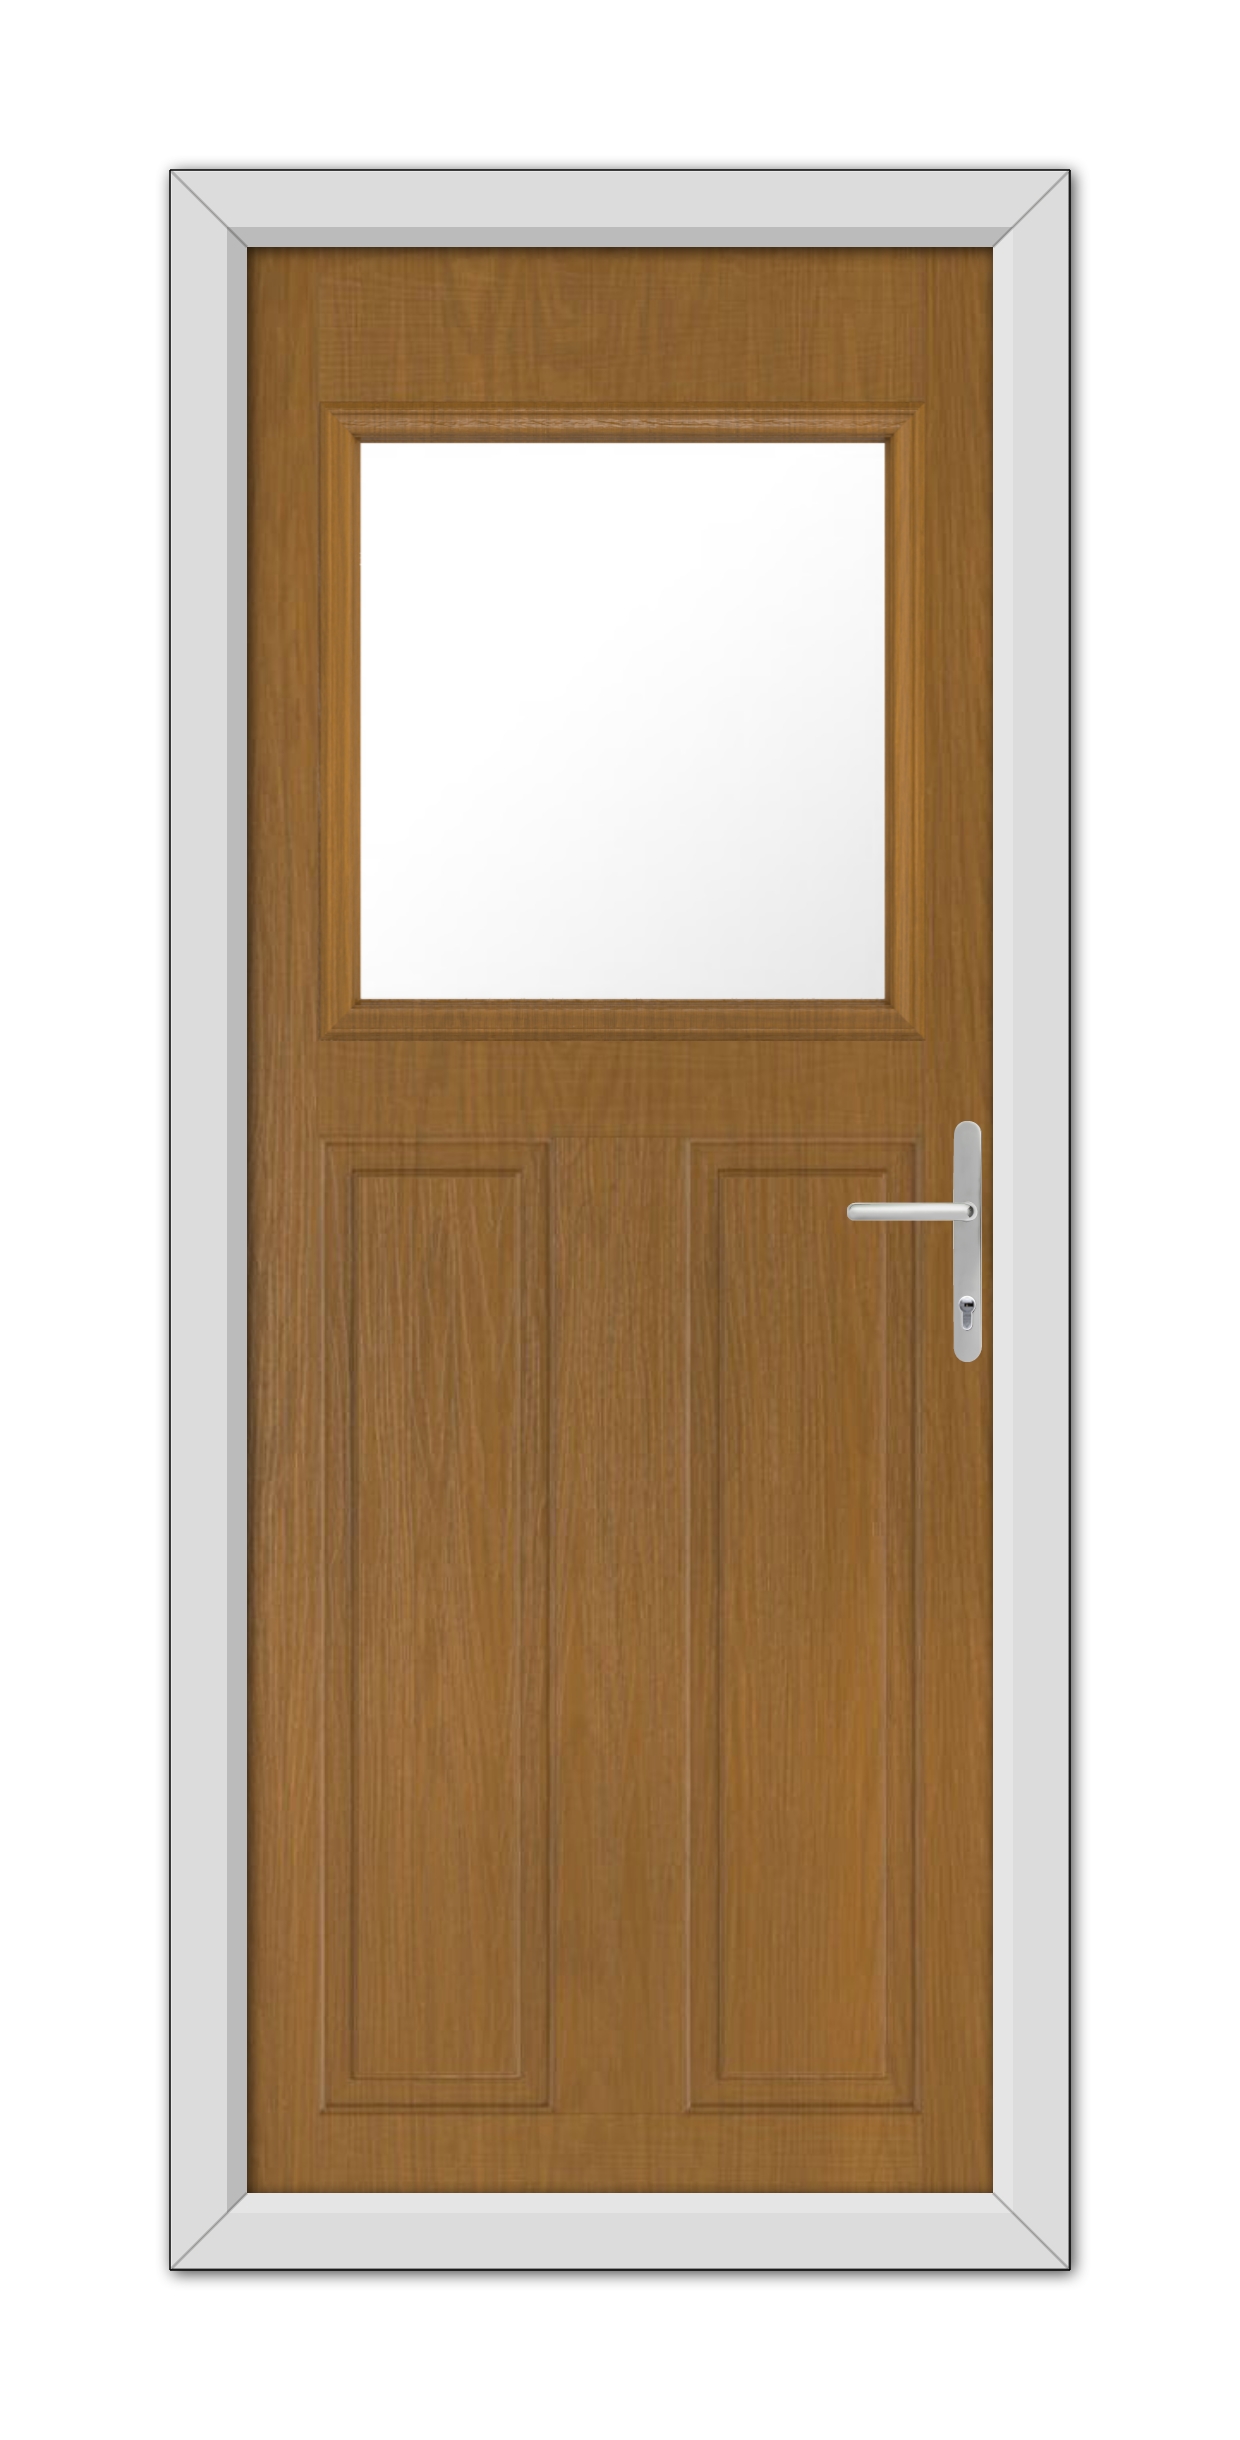 An Oak Axwell Composite Door 48mm Timber Core with a white frame, featuring a rectangular window and a metal handle on the right.